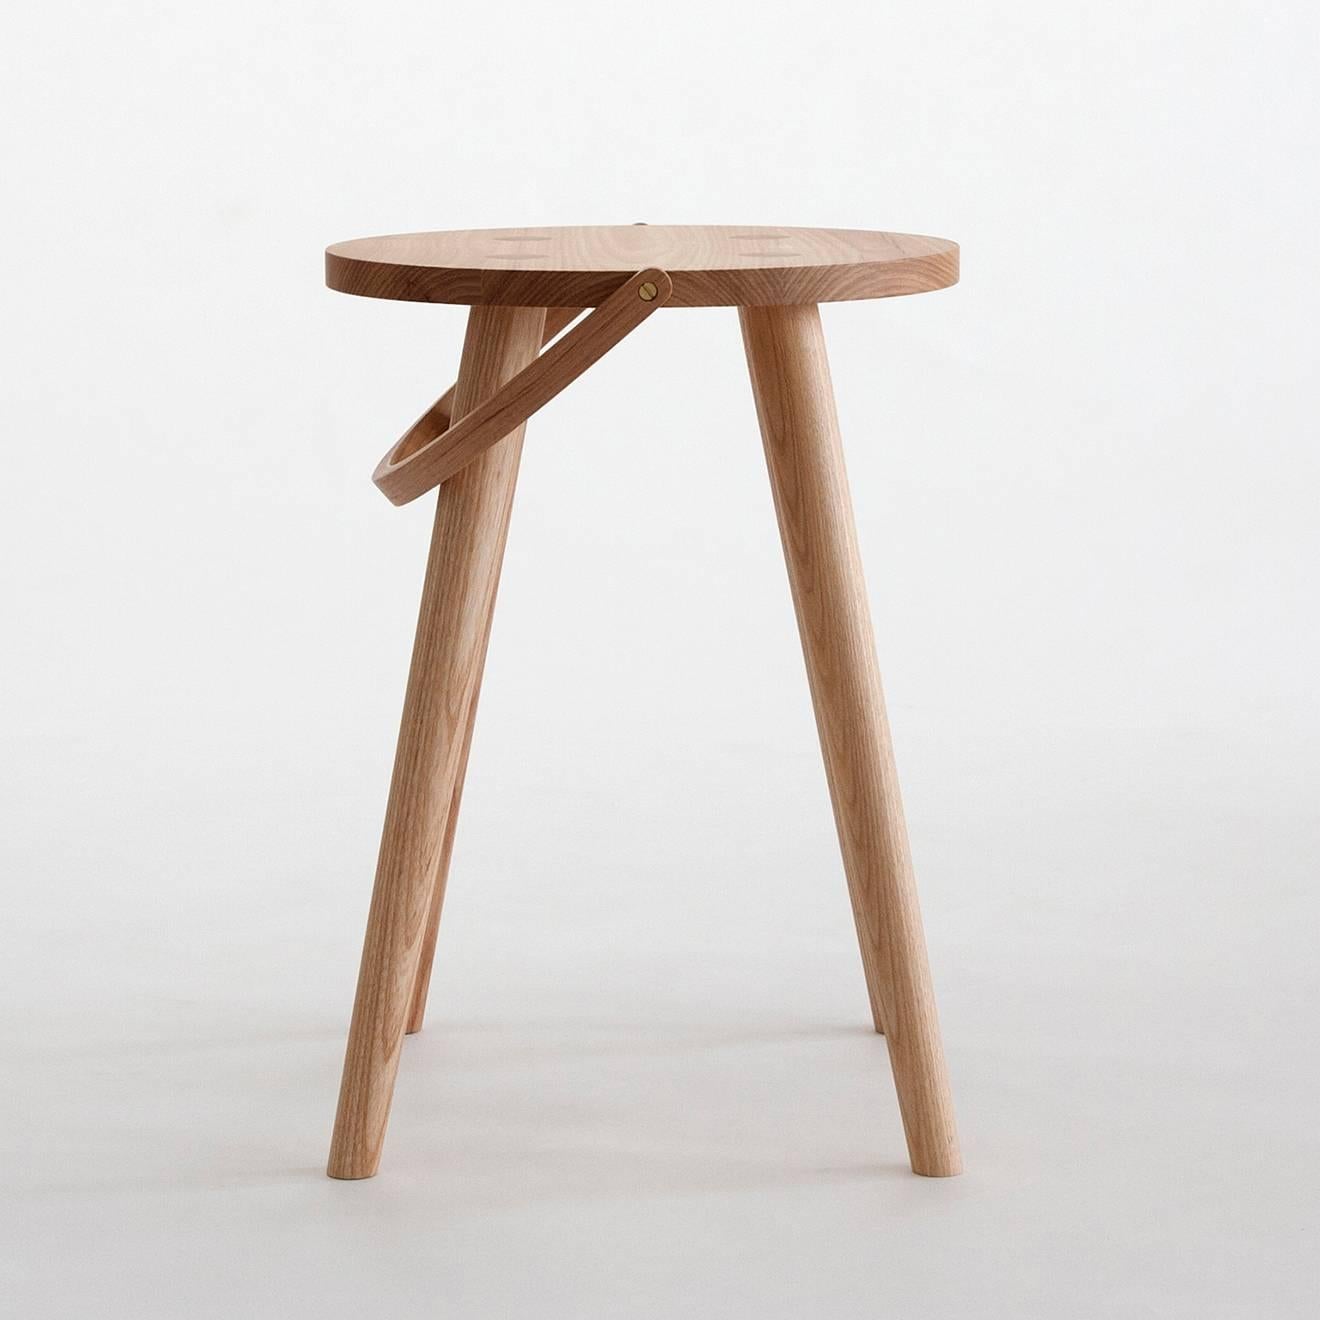 Turned Single Bucket Stool, Seat, Side Table with Bentwood Handle in Solid Ash